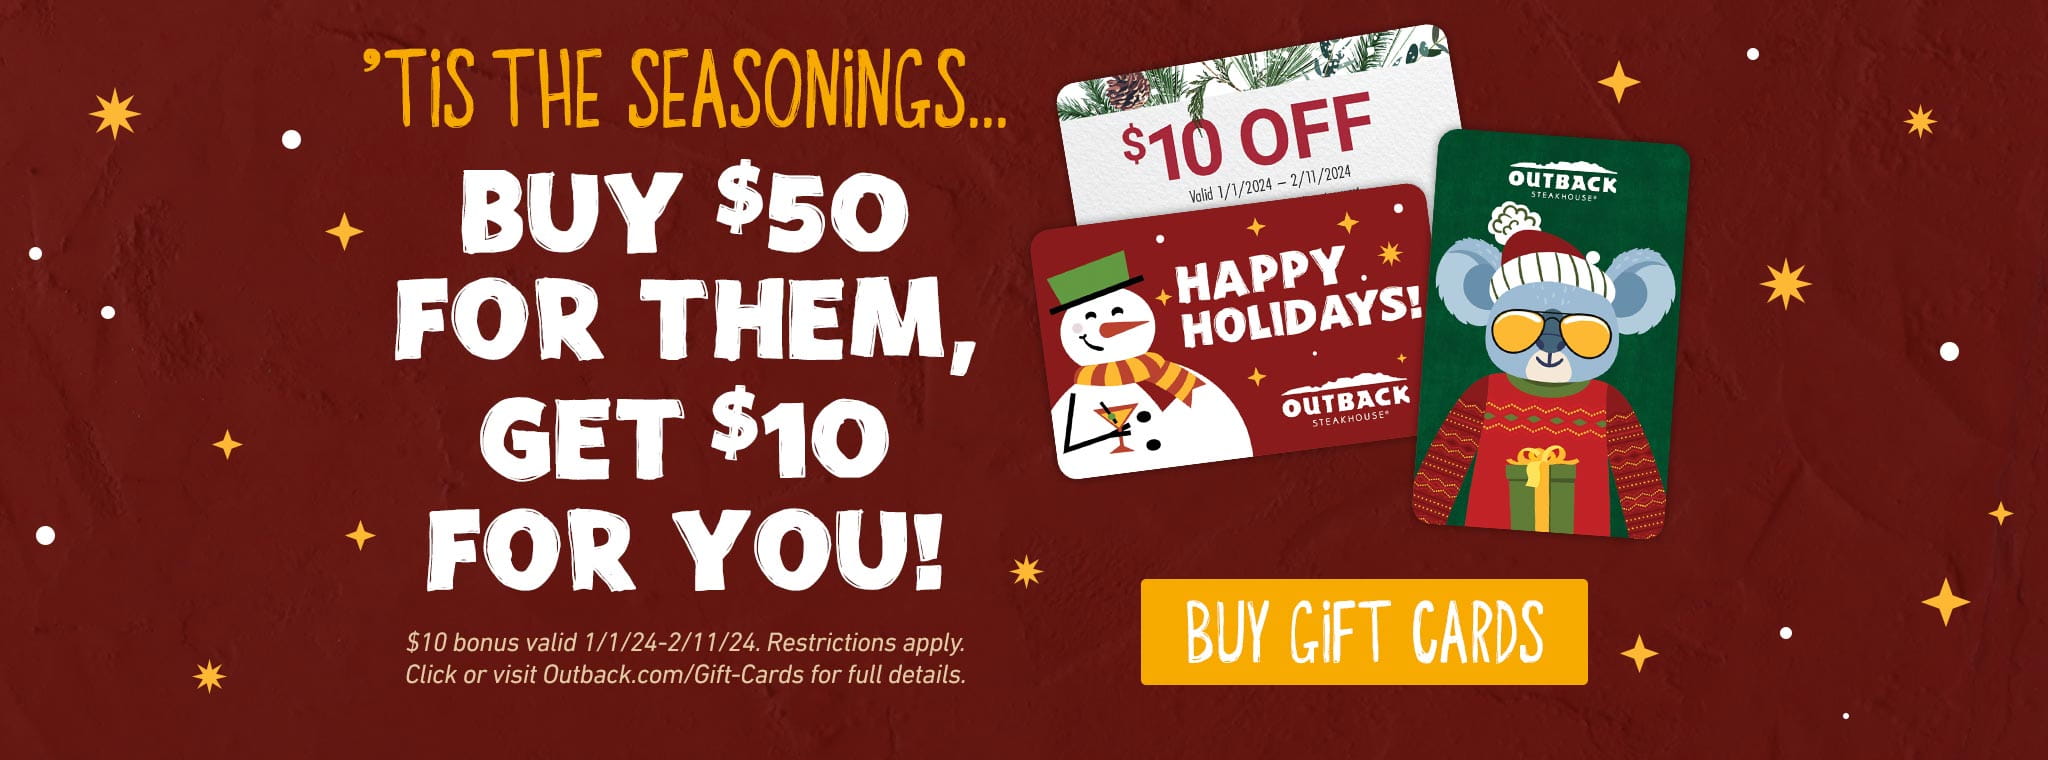 Tis The Seasons...Buy $50 For Them Get $10 For You! Buy Gift Cards